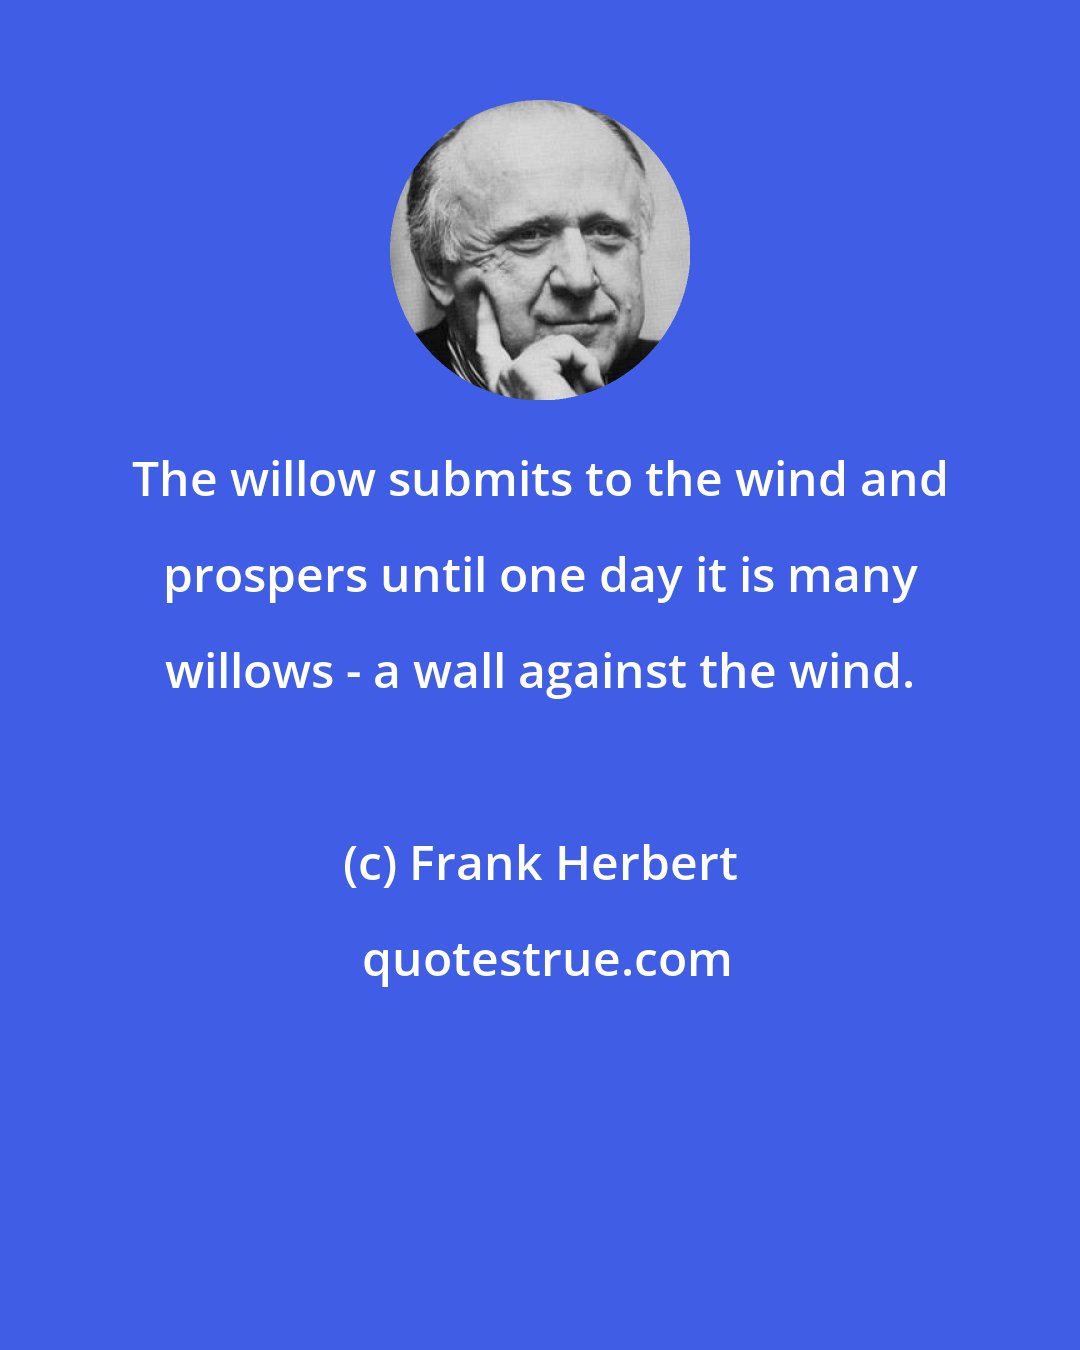 Frank Herbert: The willow submits to the wind and prospers until one day it is many willows - a wall against the wind.